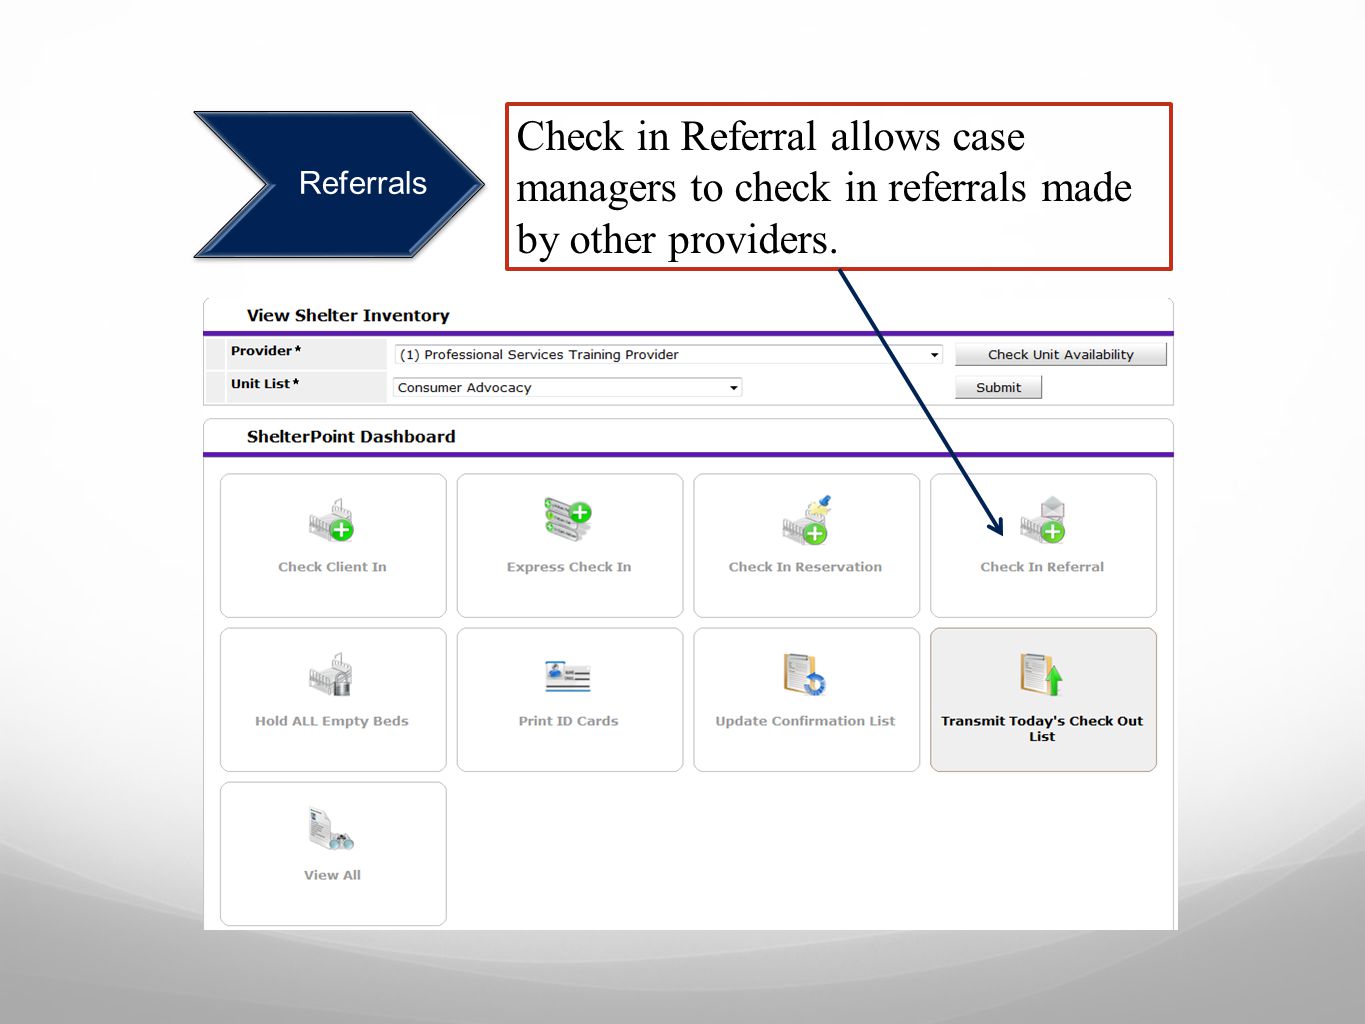 Referrals Check in Referral allows case managers to check in referrals made by other providers.